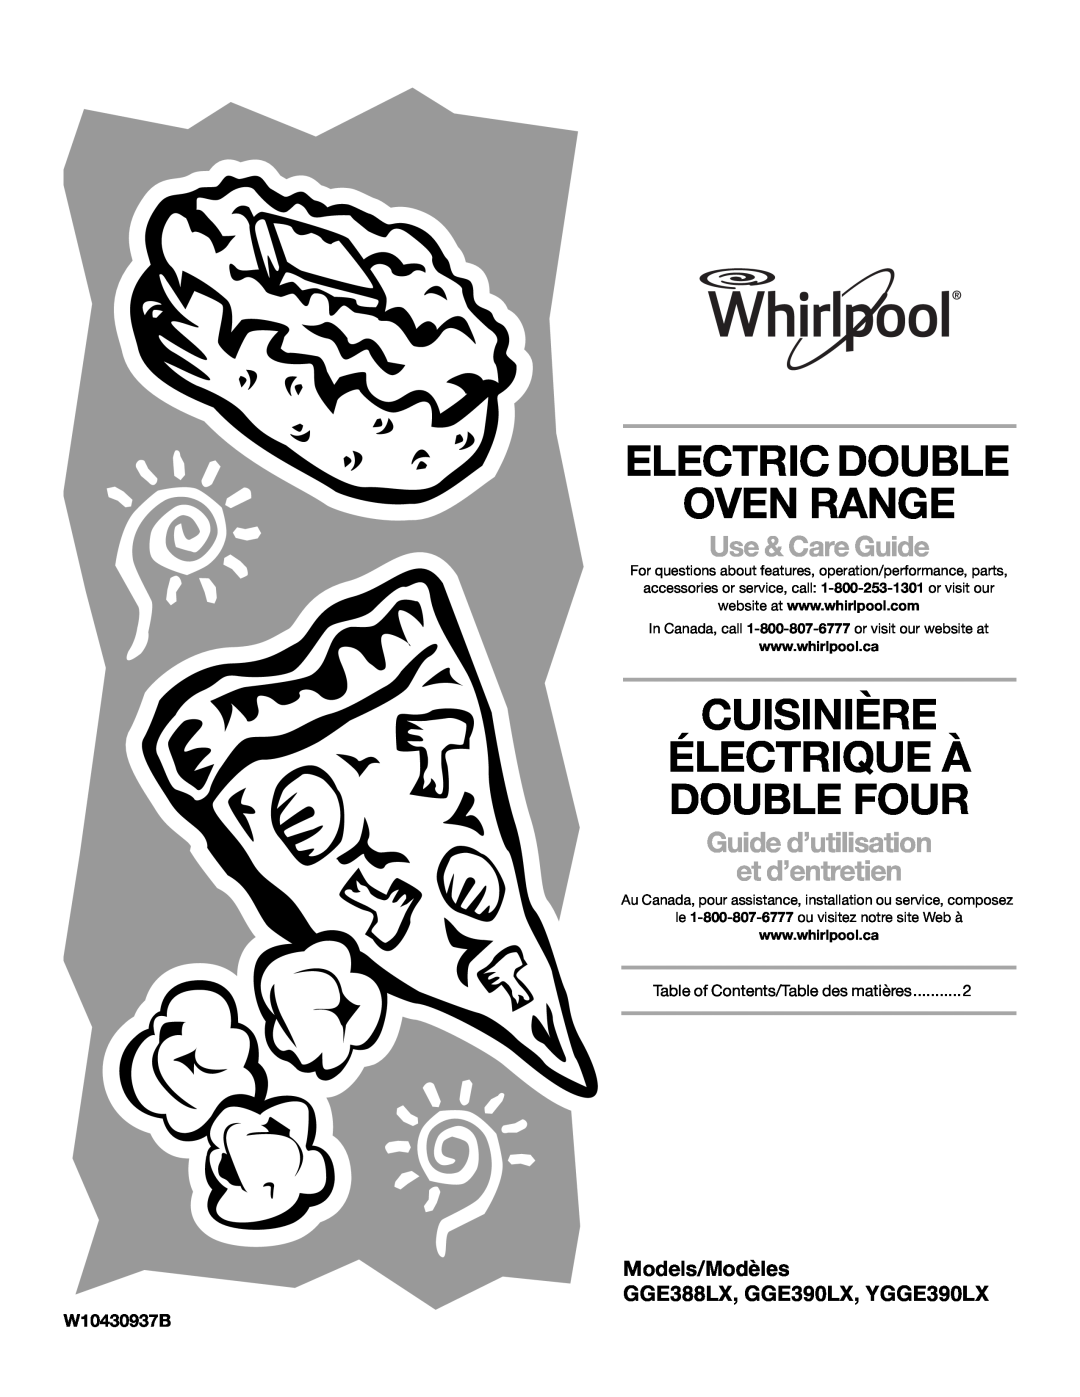 Whirlpool GGG388LXS manual GGE388LX, GGE390LX, YGGE390LX, W10430937B, Electric Double Oven Range, Use & Care Guide 